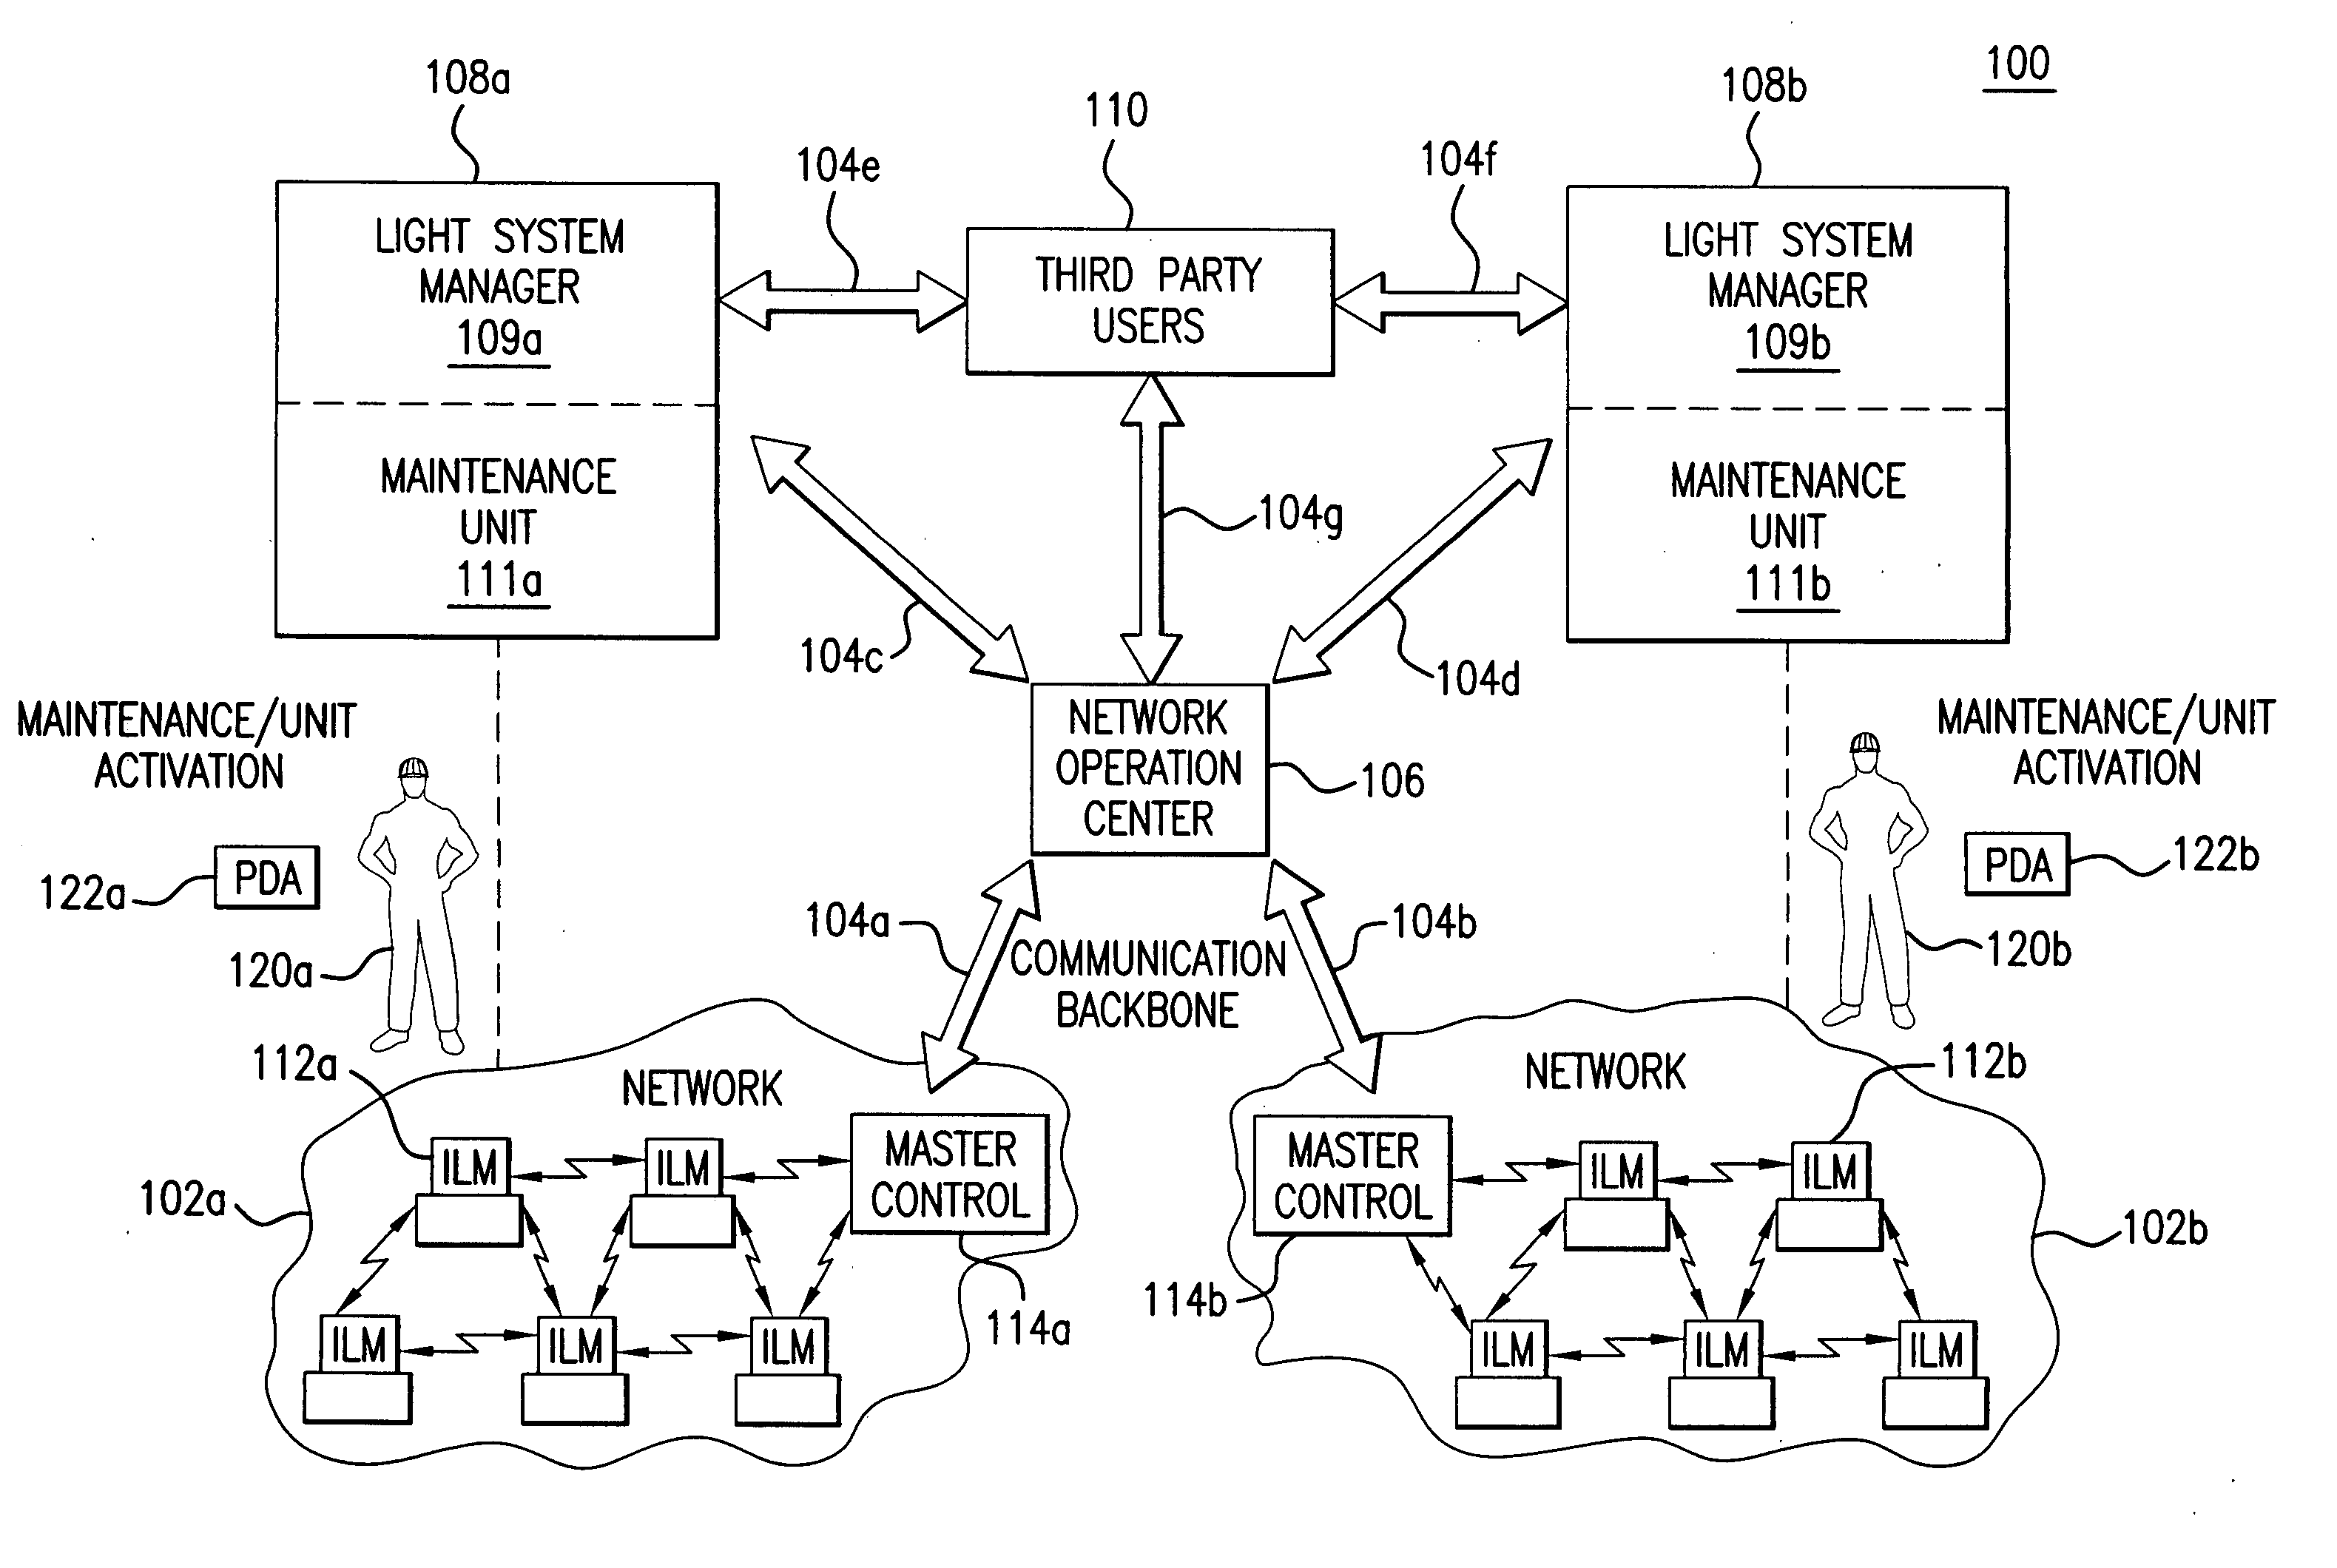 Activation device for an intelligent luminaire manager